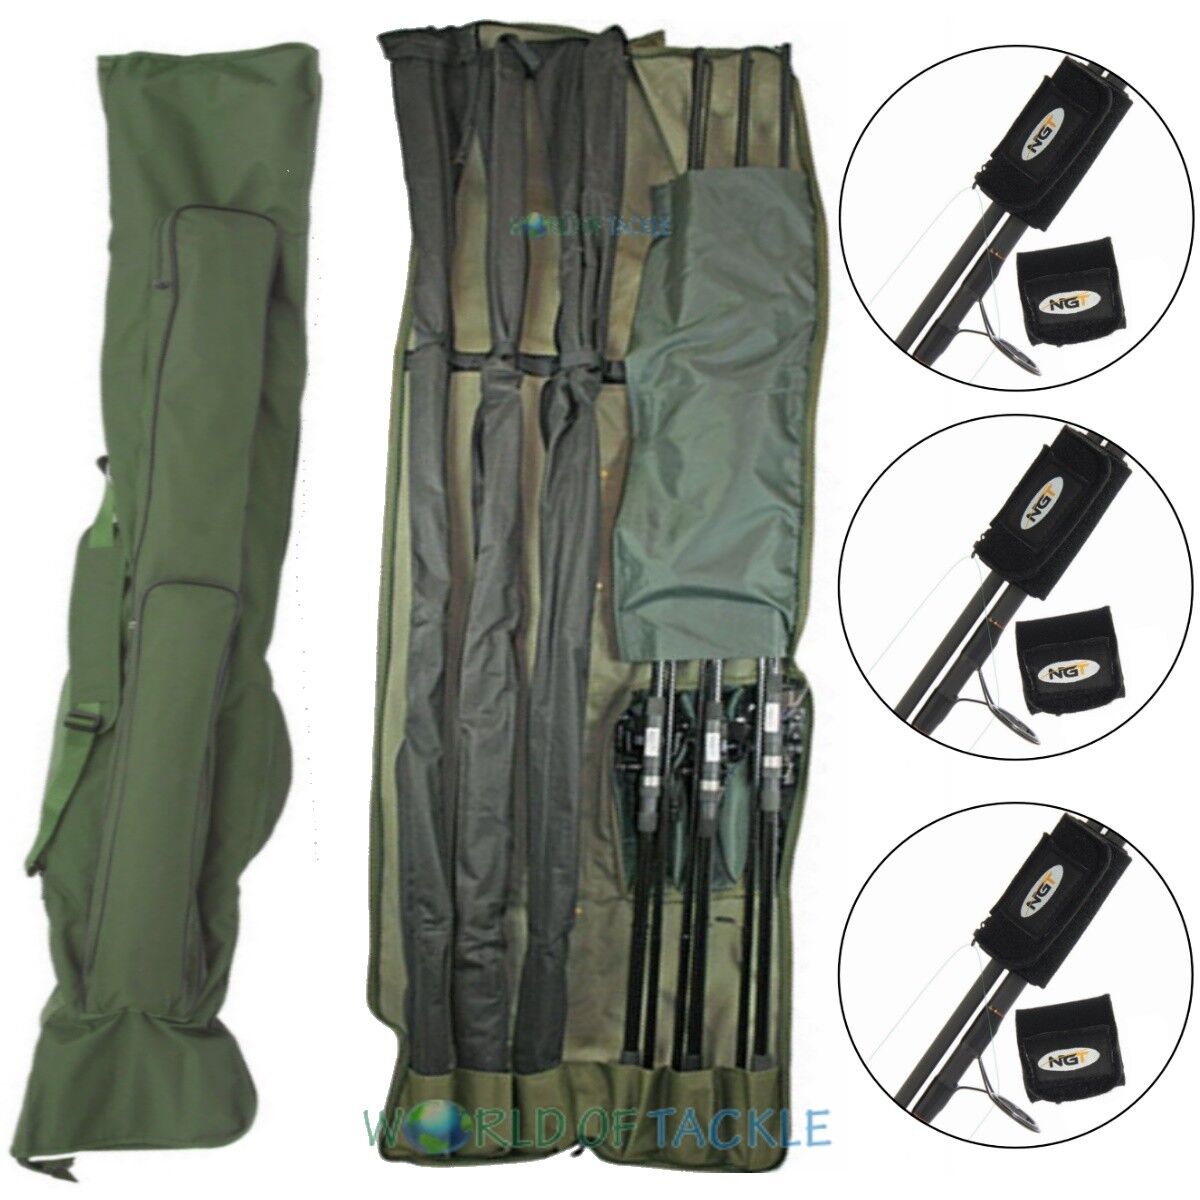 Rod Holdall Carp Fishing Bag 3 + 3 12ft Rods and Reels WITH 3 RO